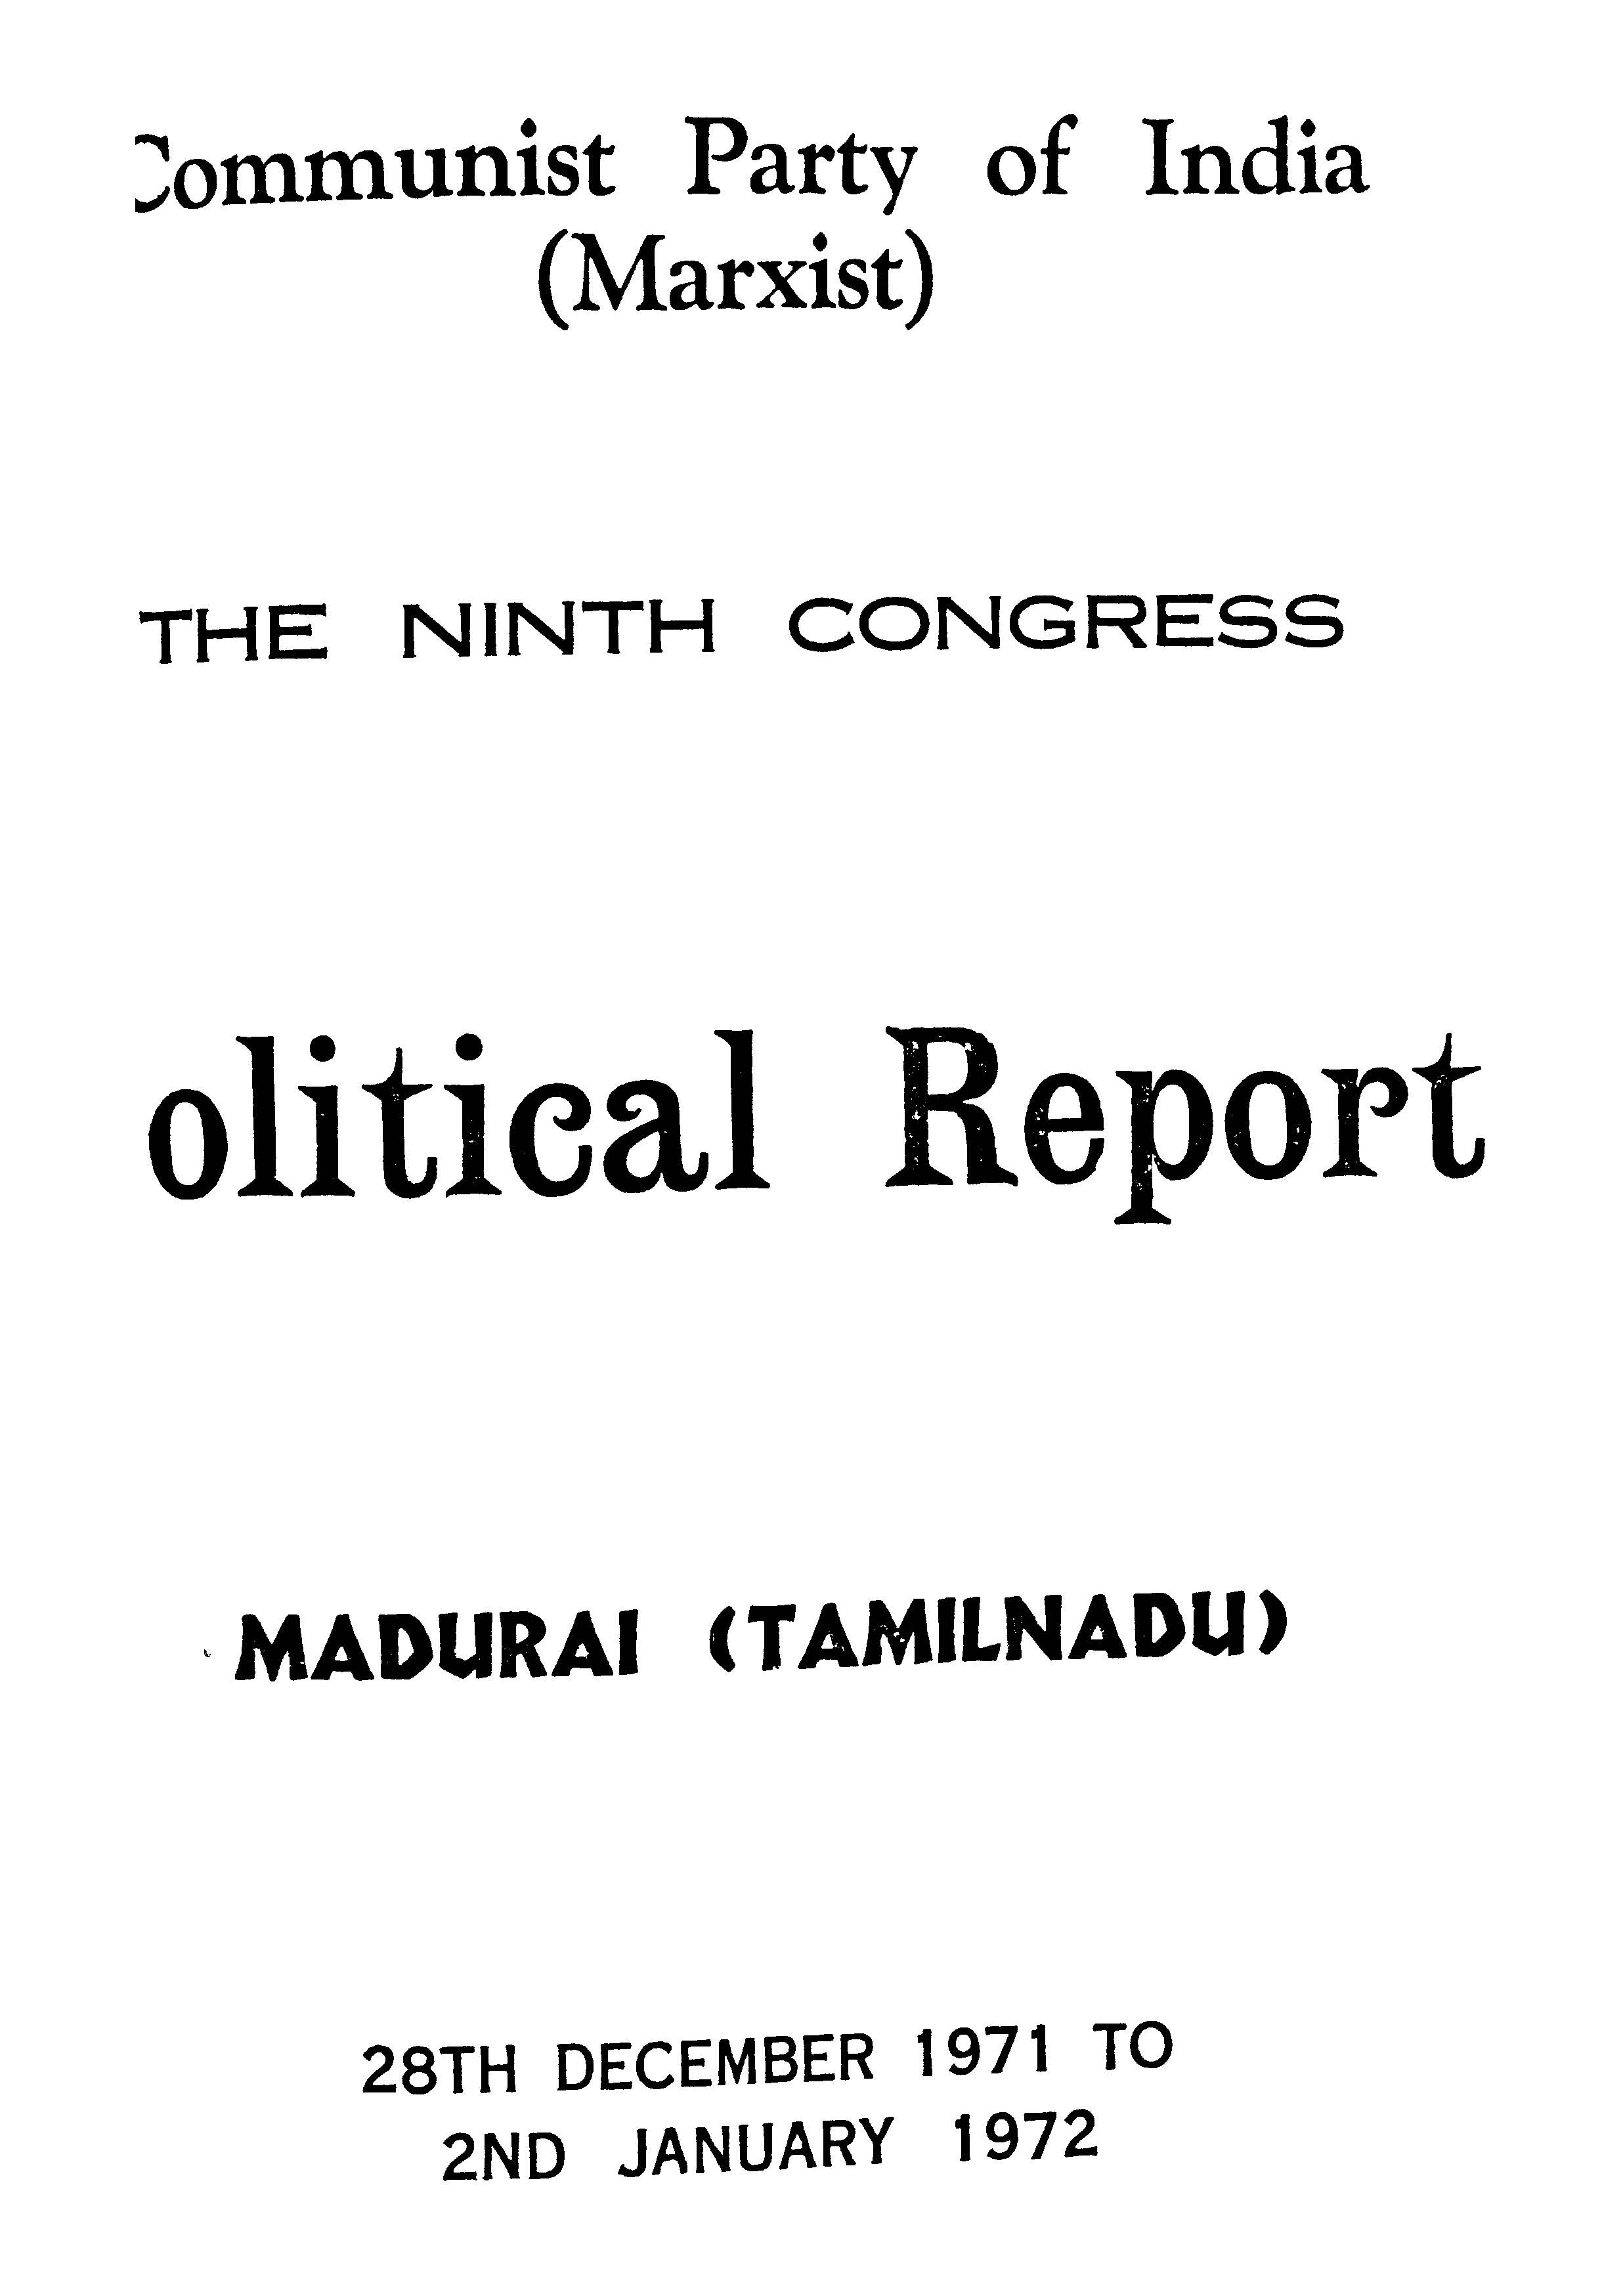 CPI(M) The 9th Congress Politcal Report (28th December 1971 to 2nd january 1972)